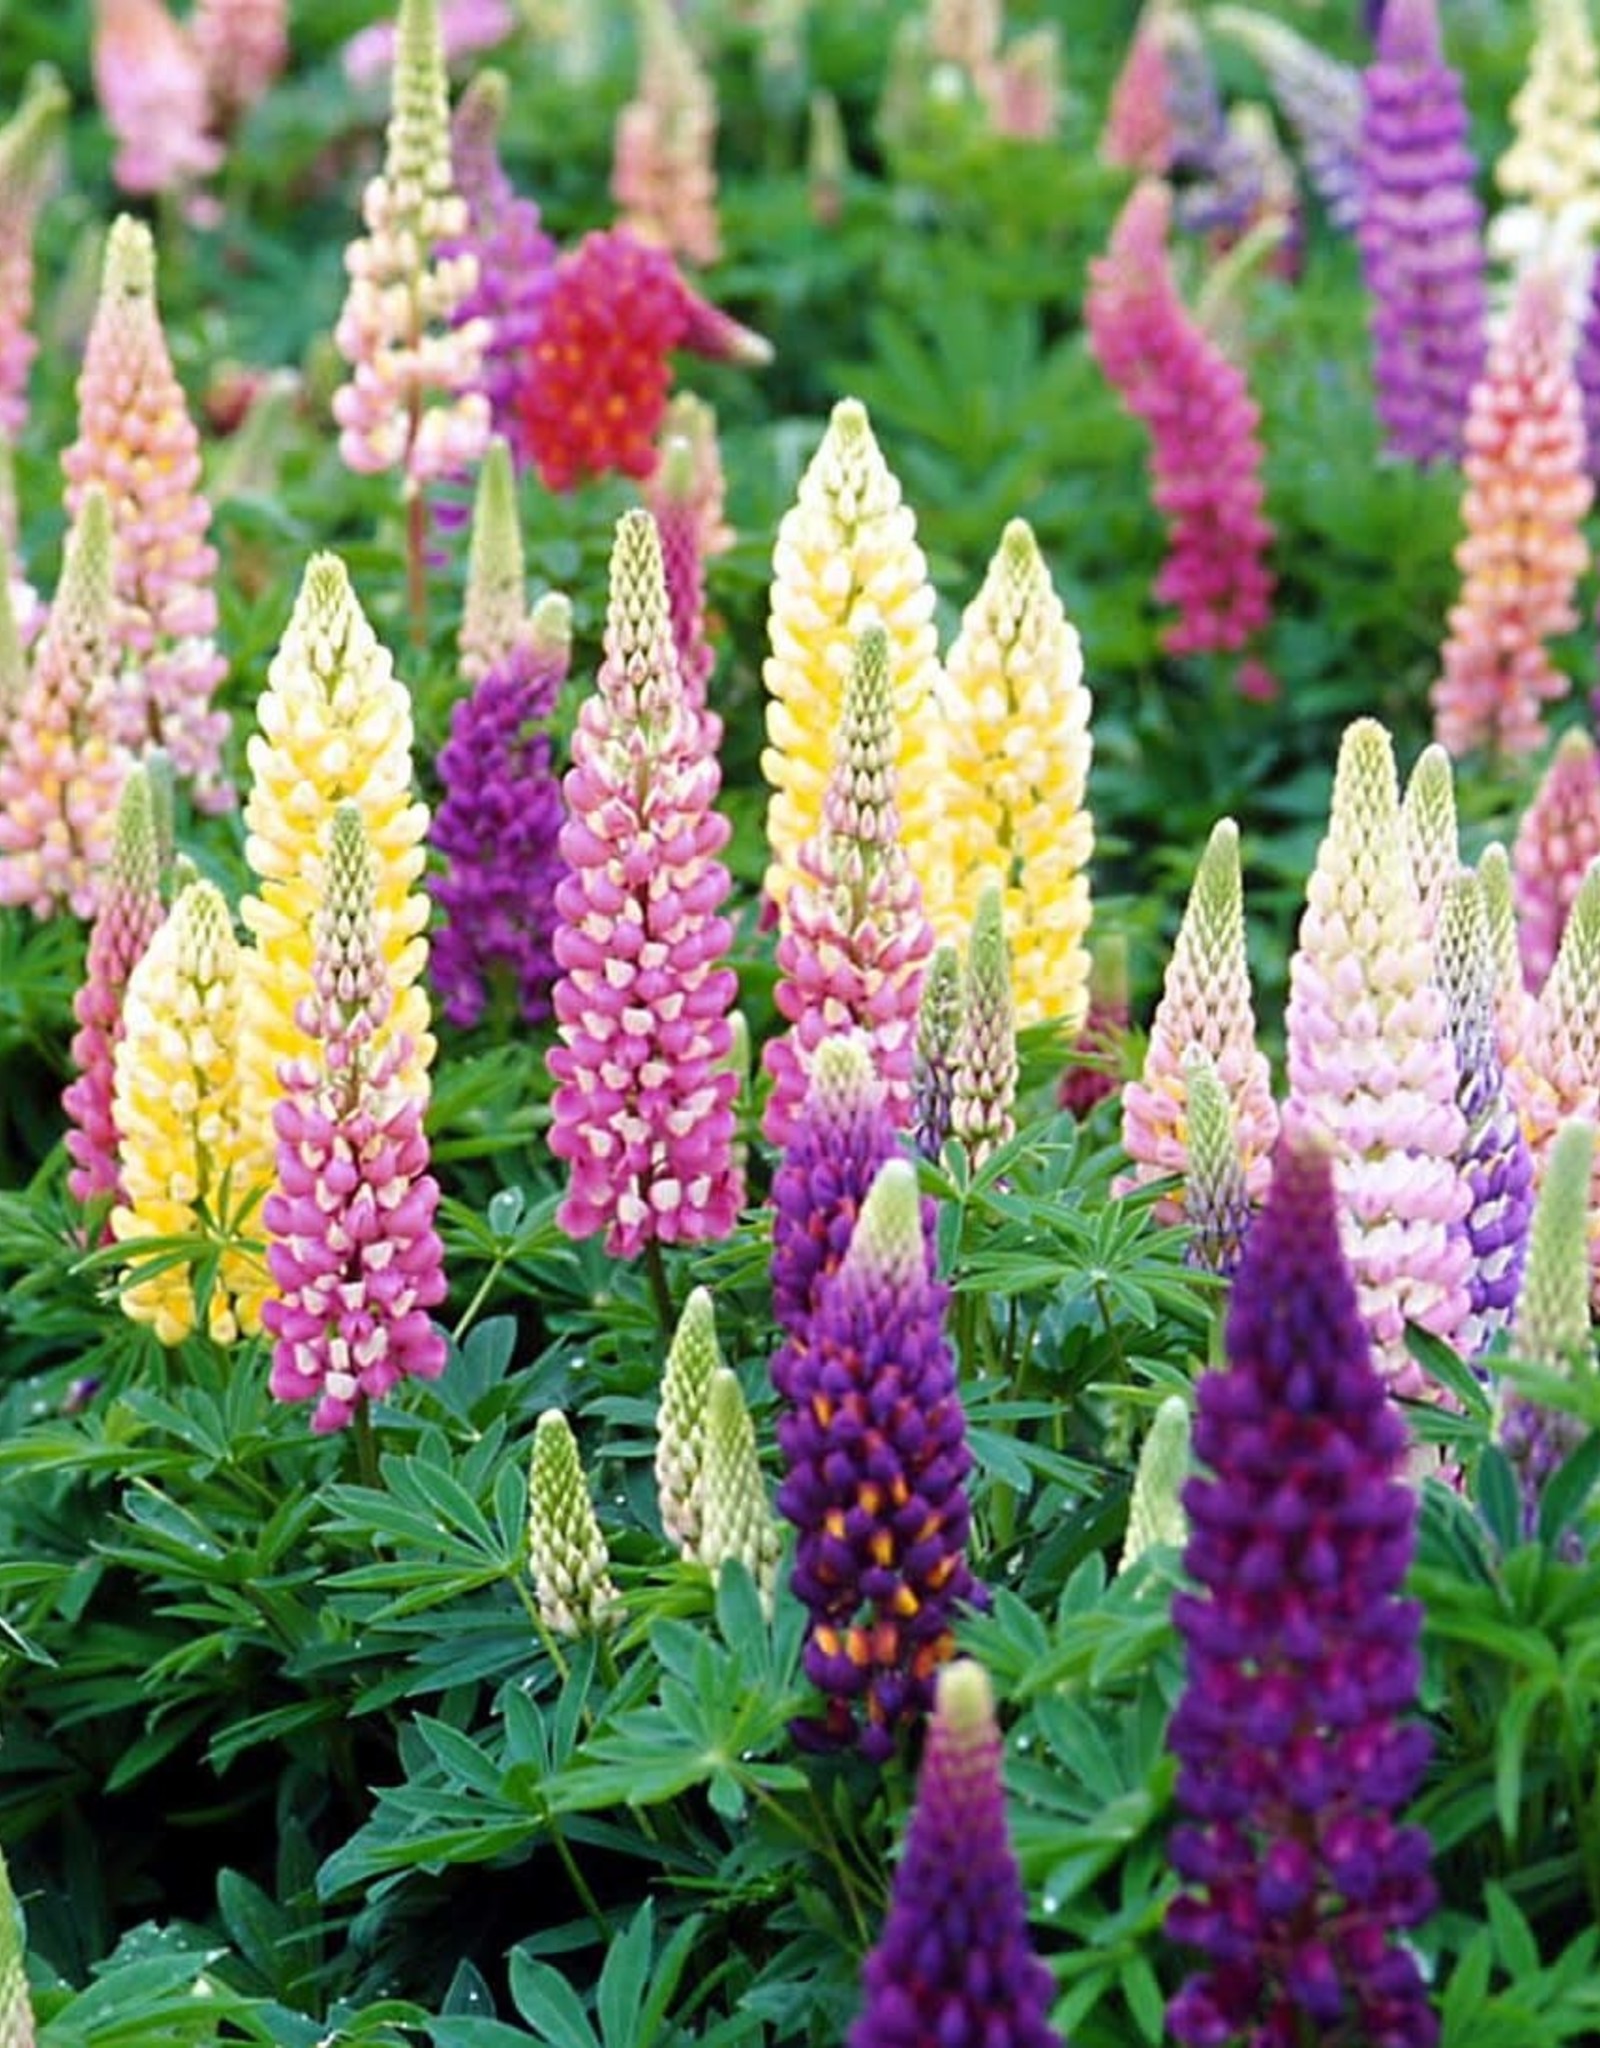 Sester Farms Lupinus polyphyllus 'Popsicle Mix'  Lupine #1